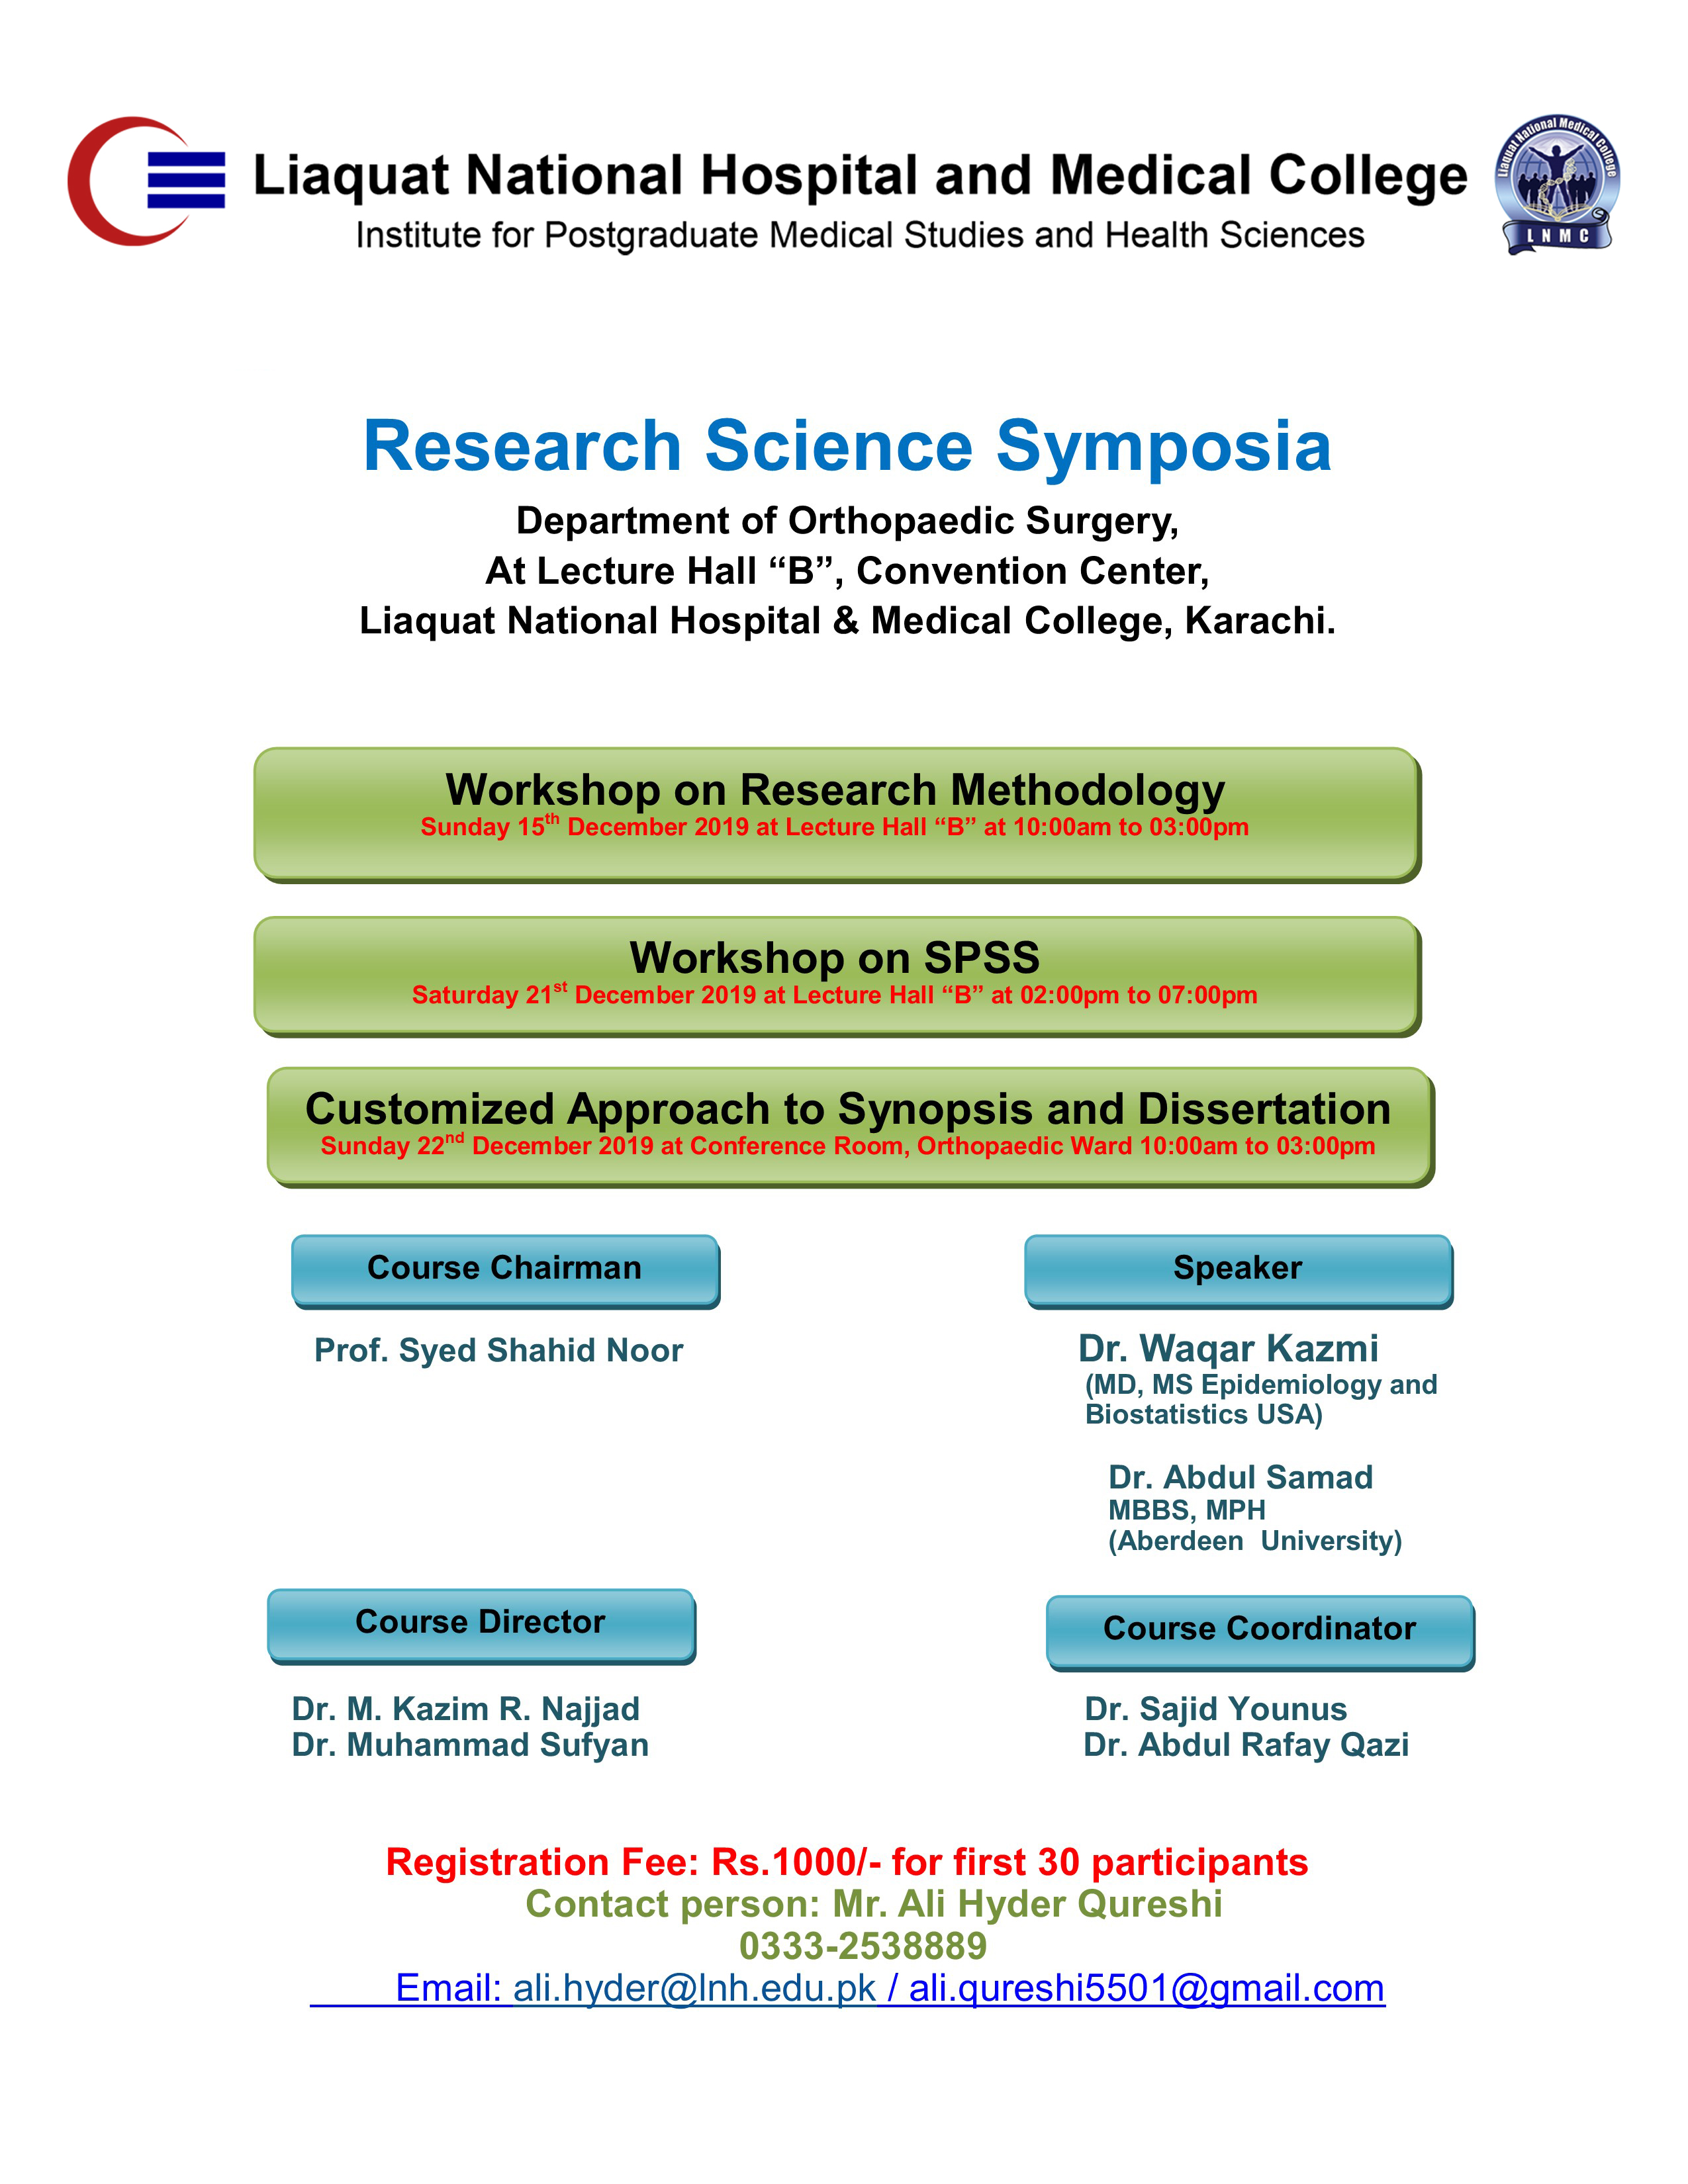 Research Science Symposia